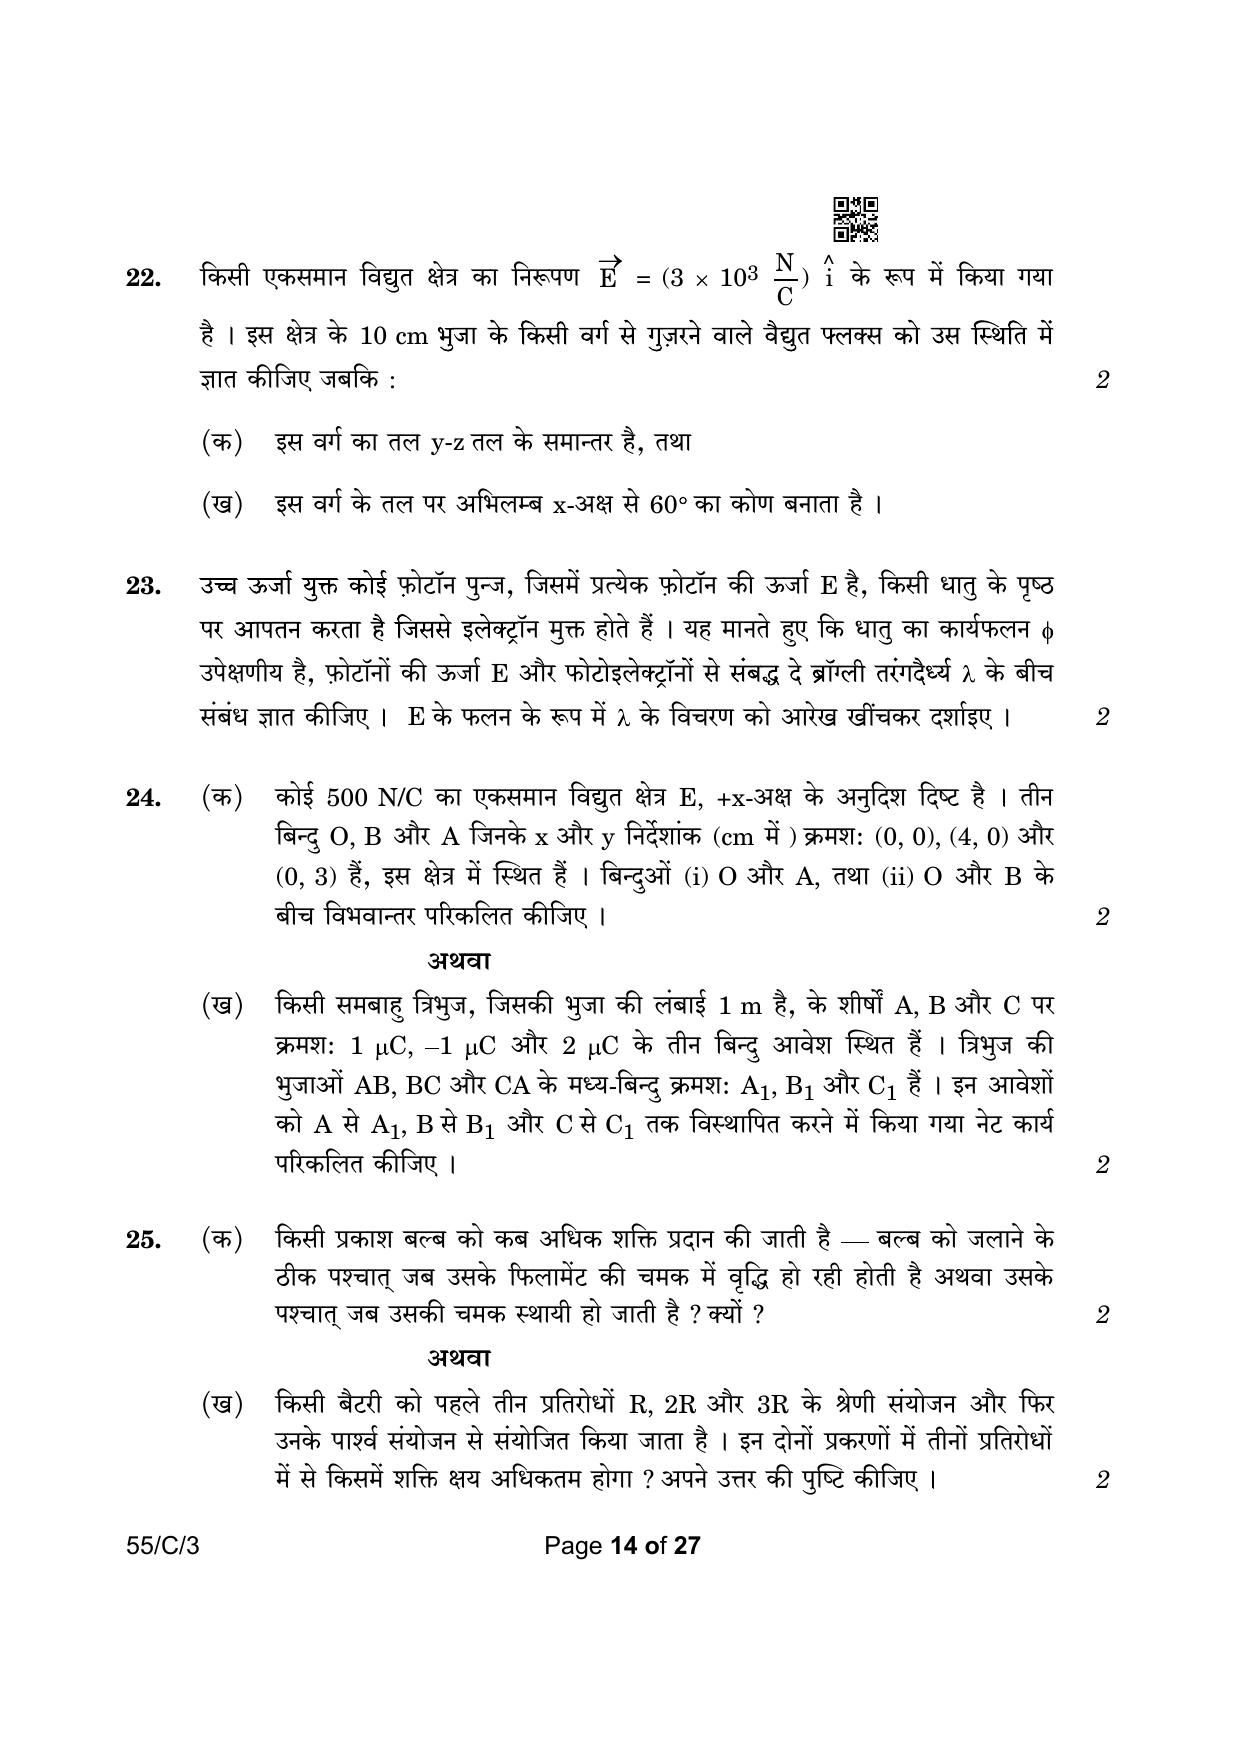 CBSE Class 12 55-3 Physics 2023 (Compartment) Question Paper - Page 14